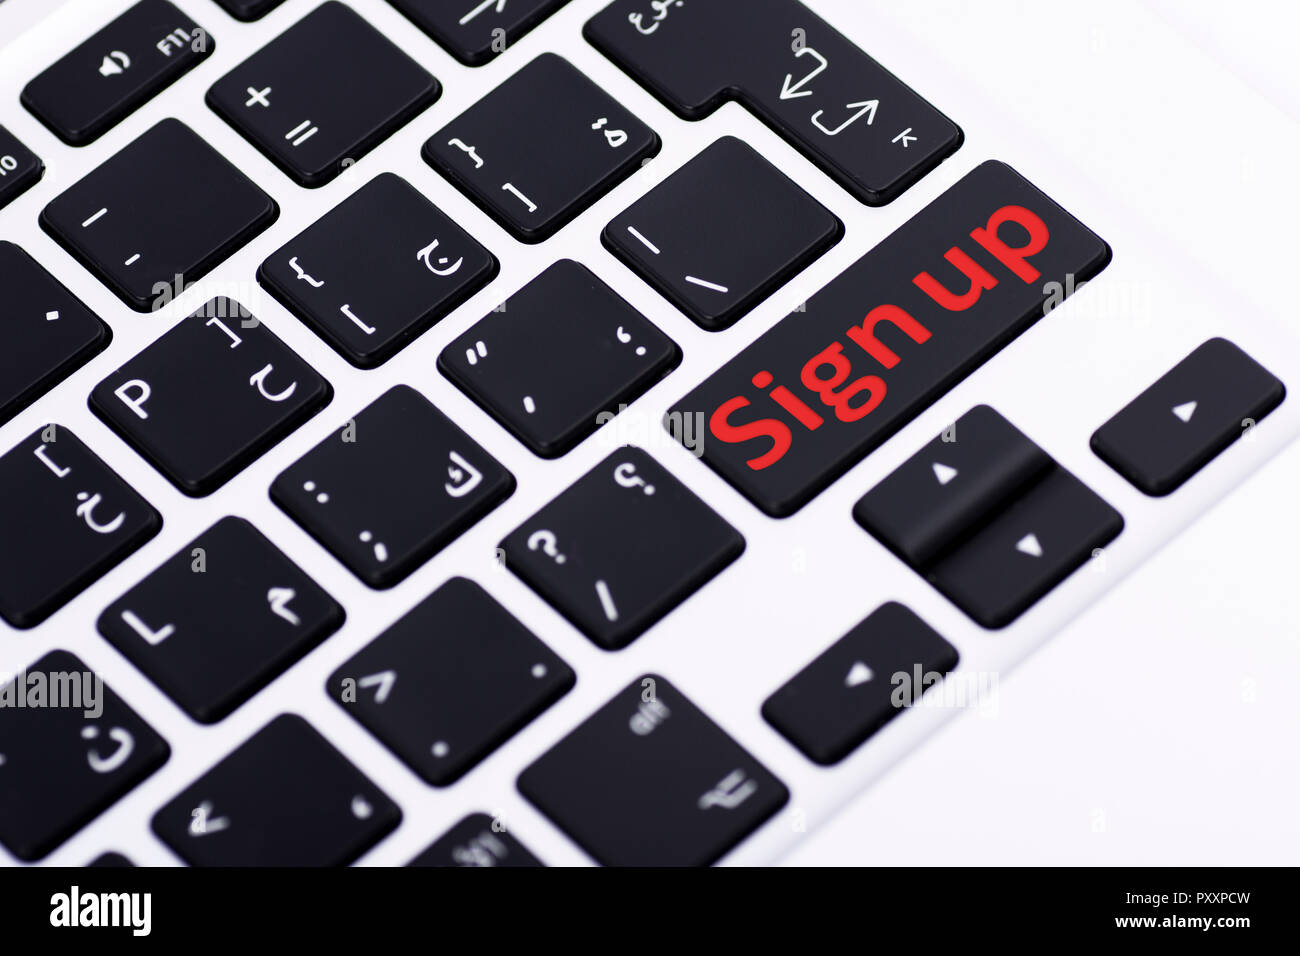 Signup on keyboard button Stock Photo